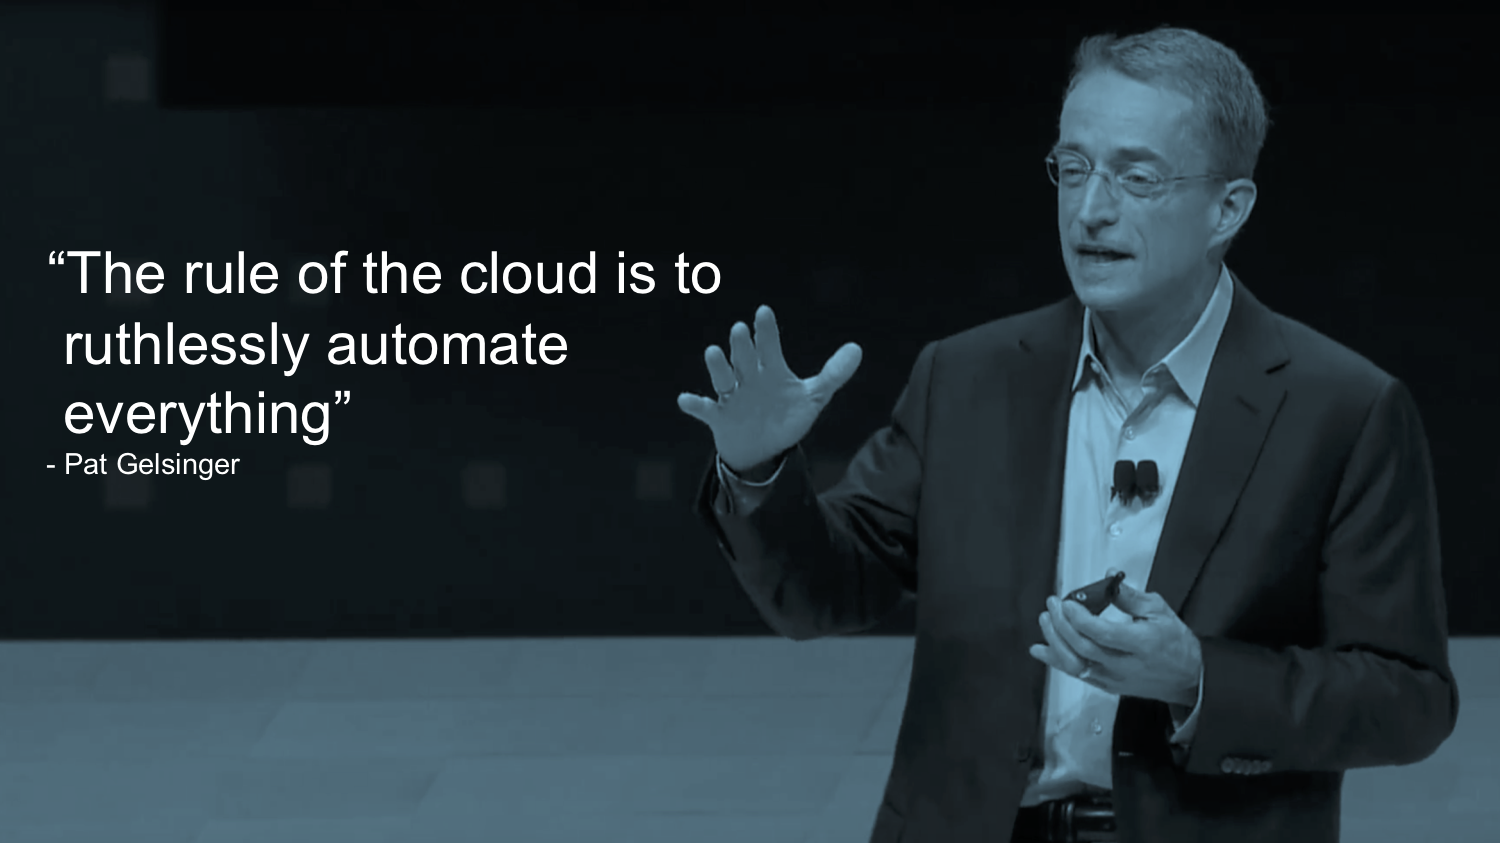 “The rule of the cloud is to ruthlessly automate everything” - Pat Gelsinger